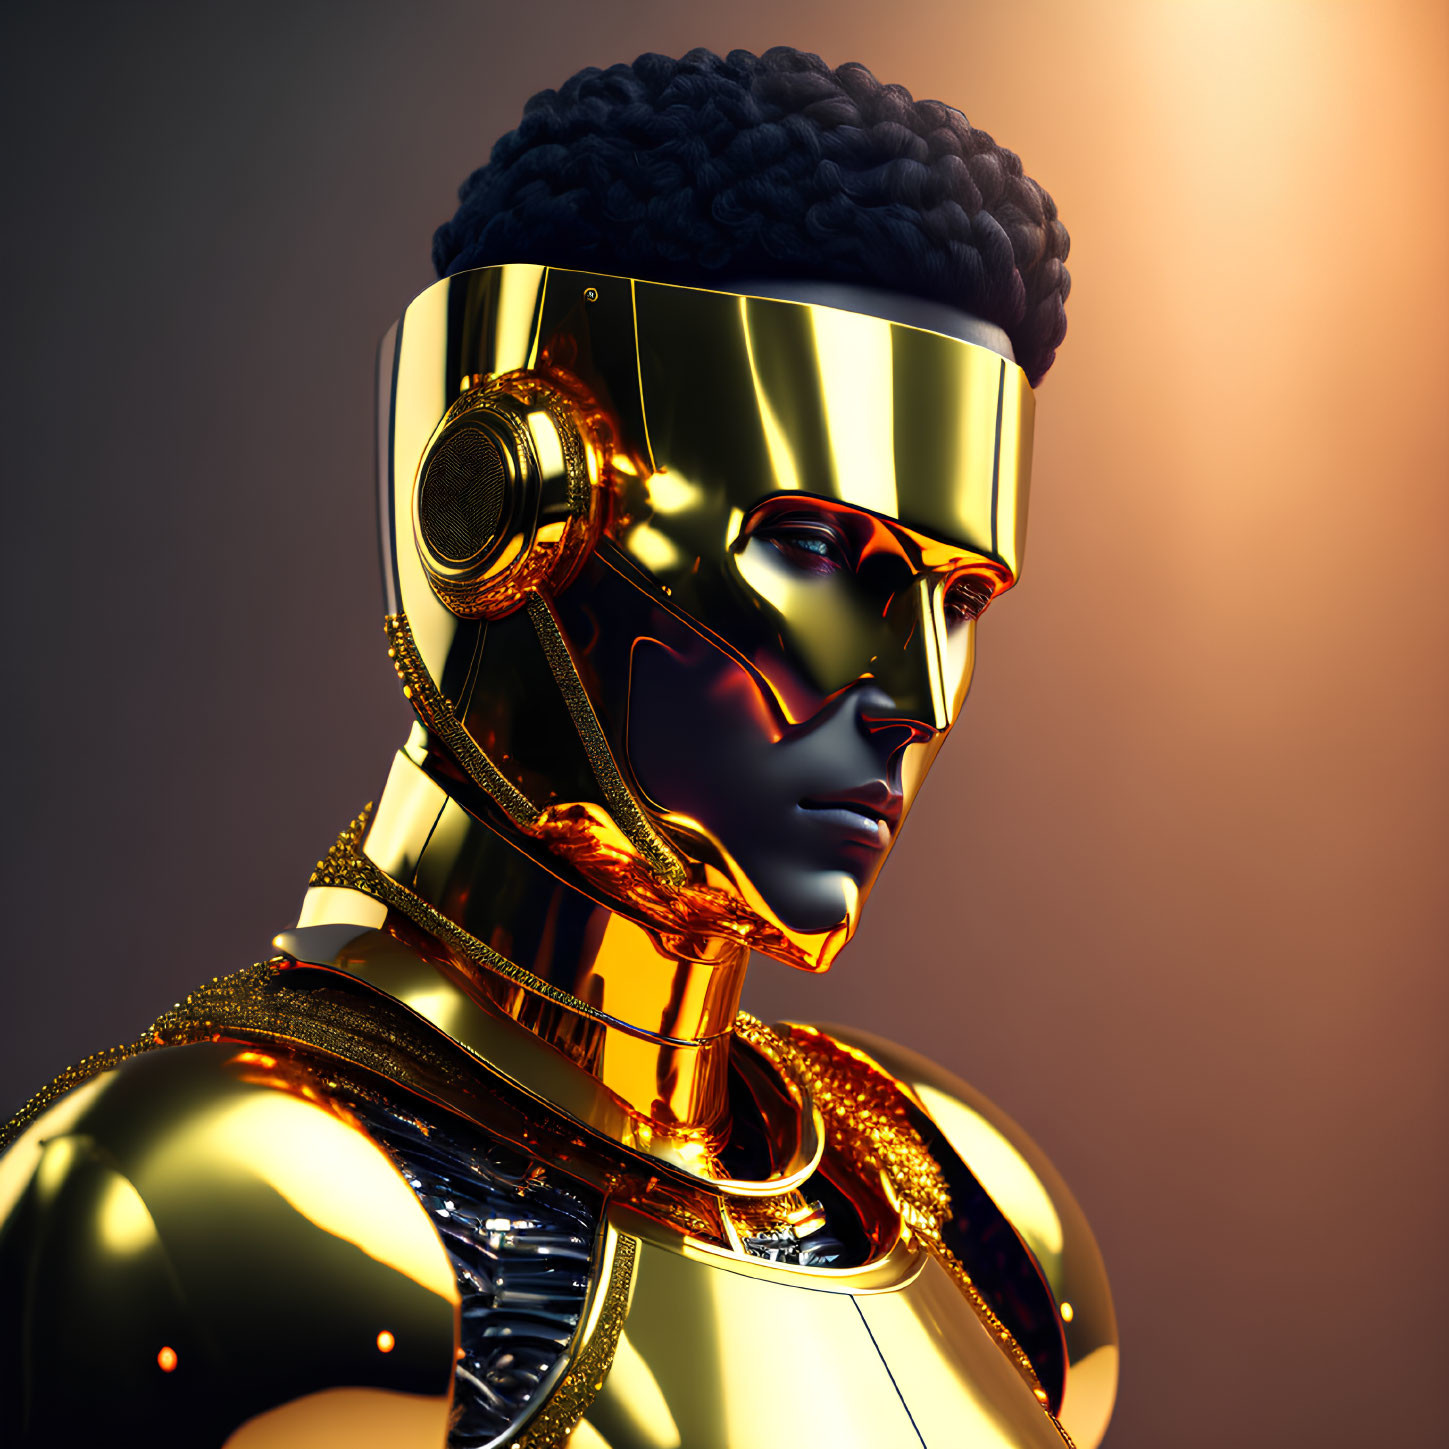 Futuristic robot with gold surface and black headpiece on warm background